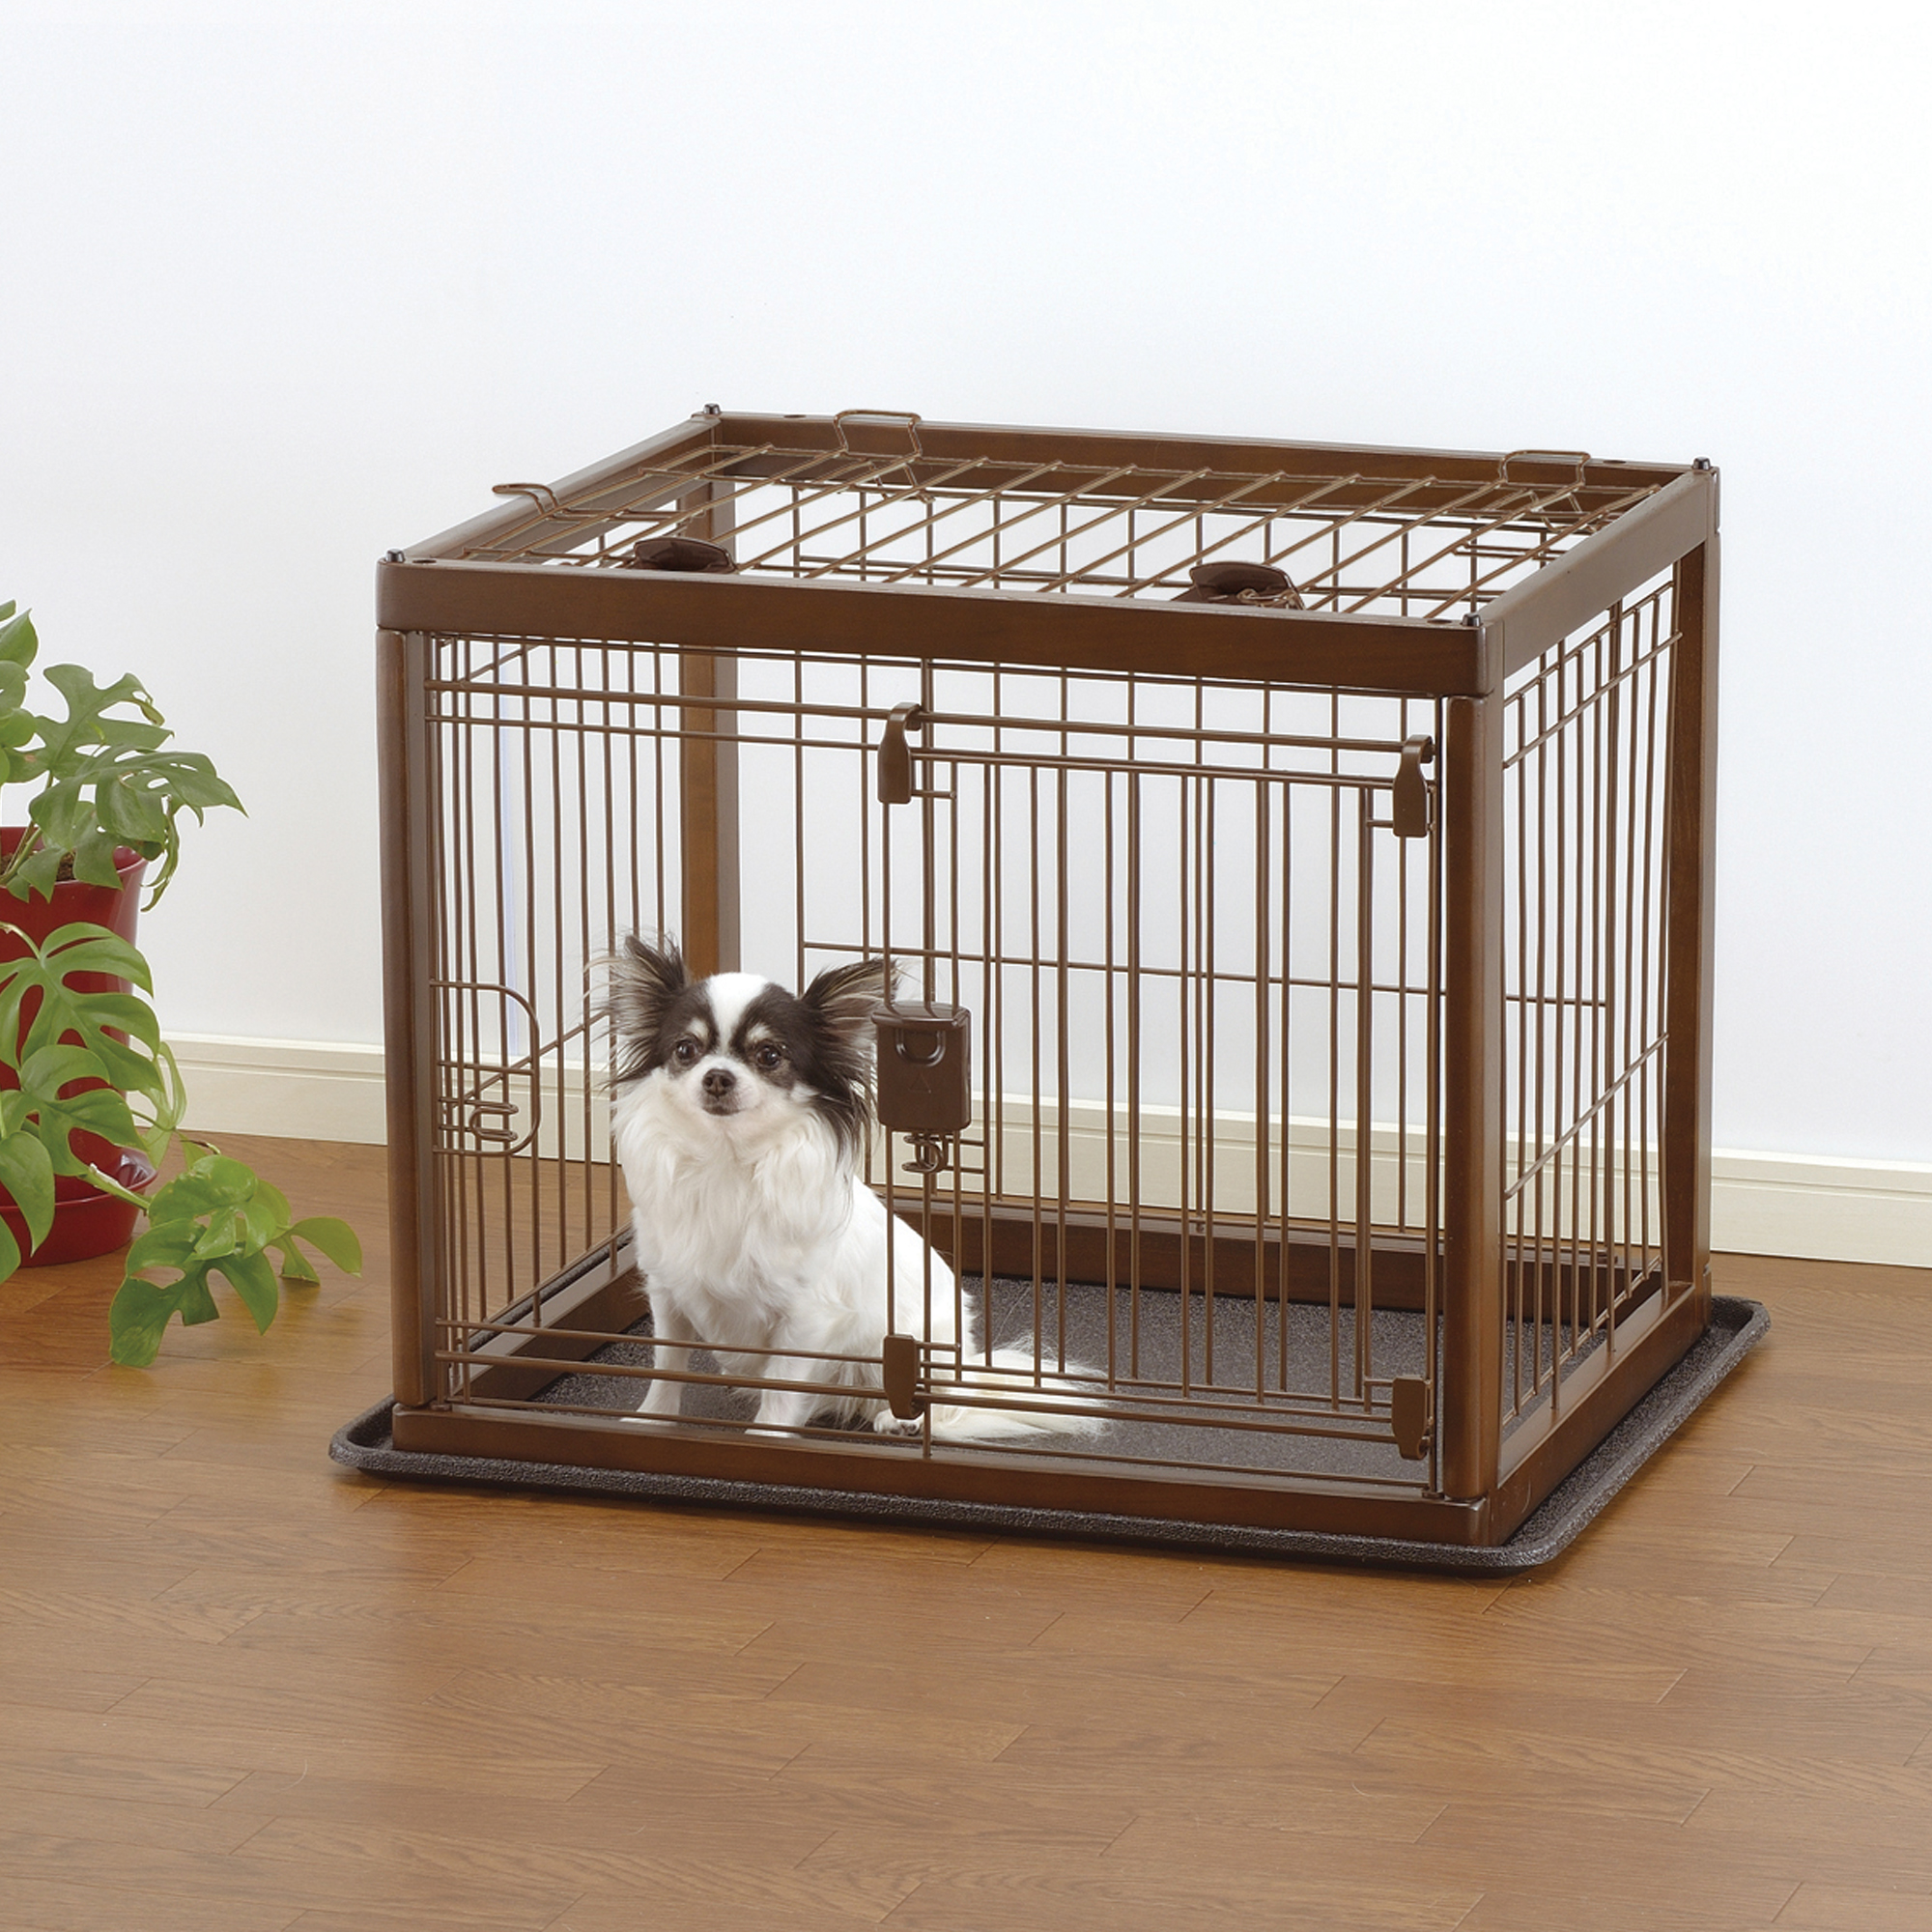 Why Crate Training is Important - Richell USA Inc.